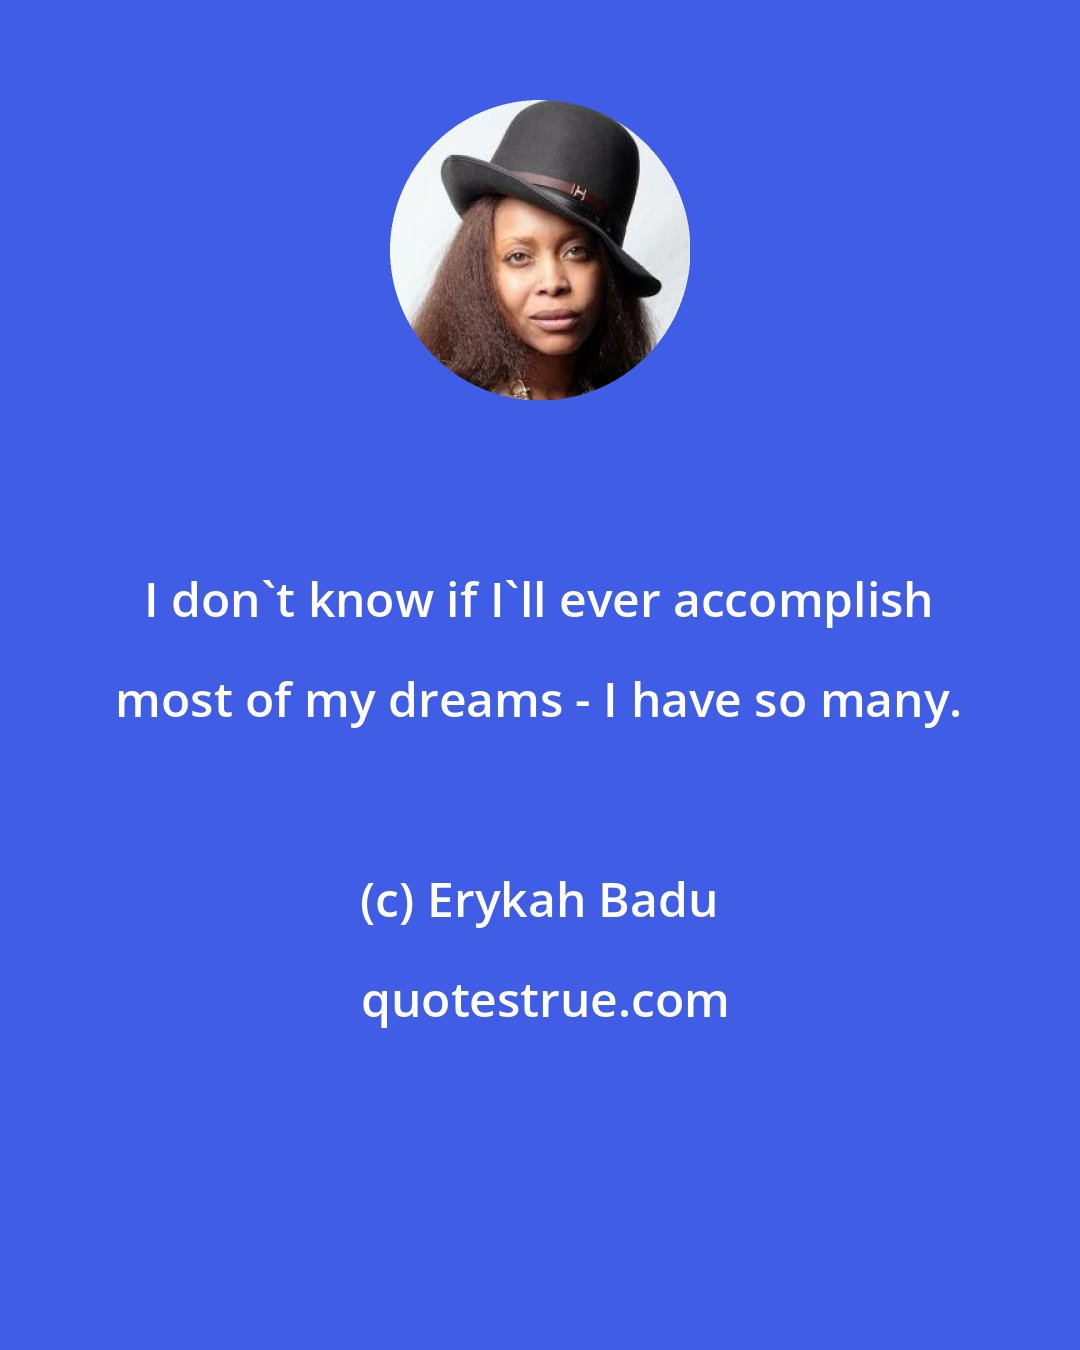 Erykah Badu: I don't know if I'll ever accomplish most of my dreams - I have so many.